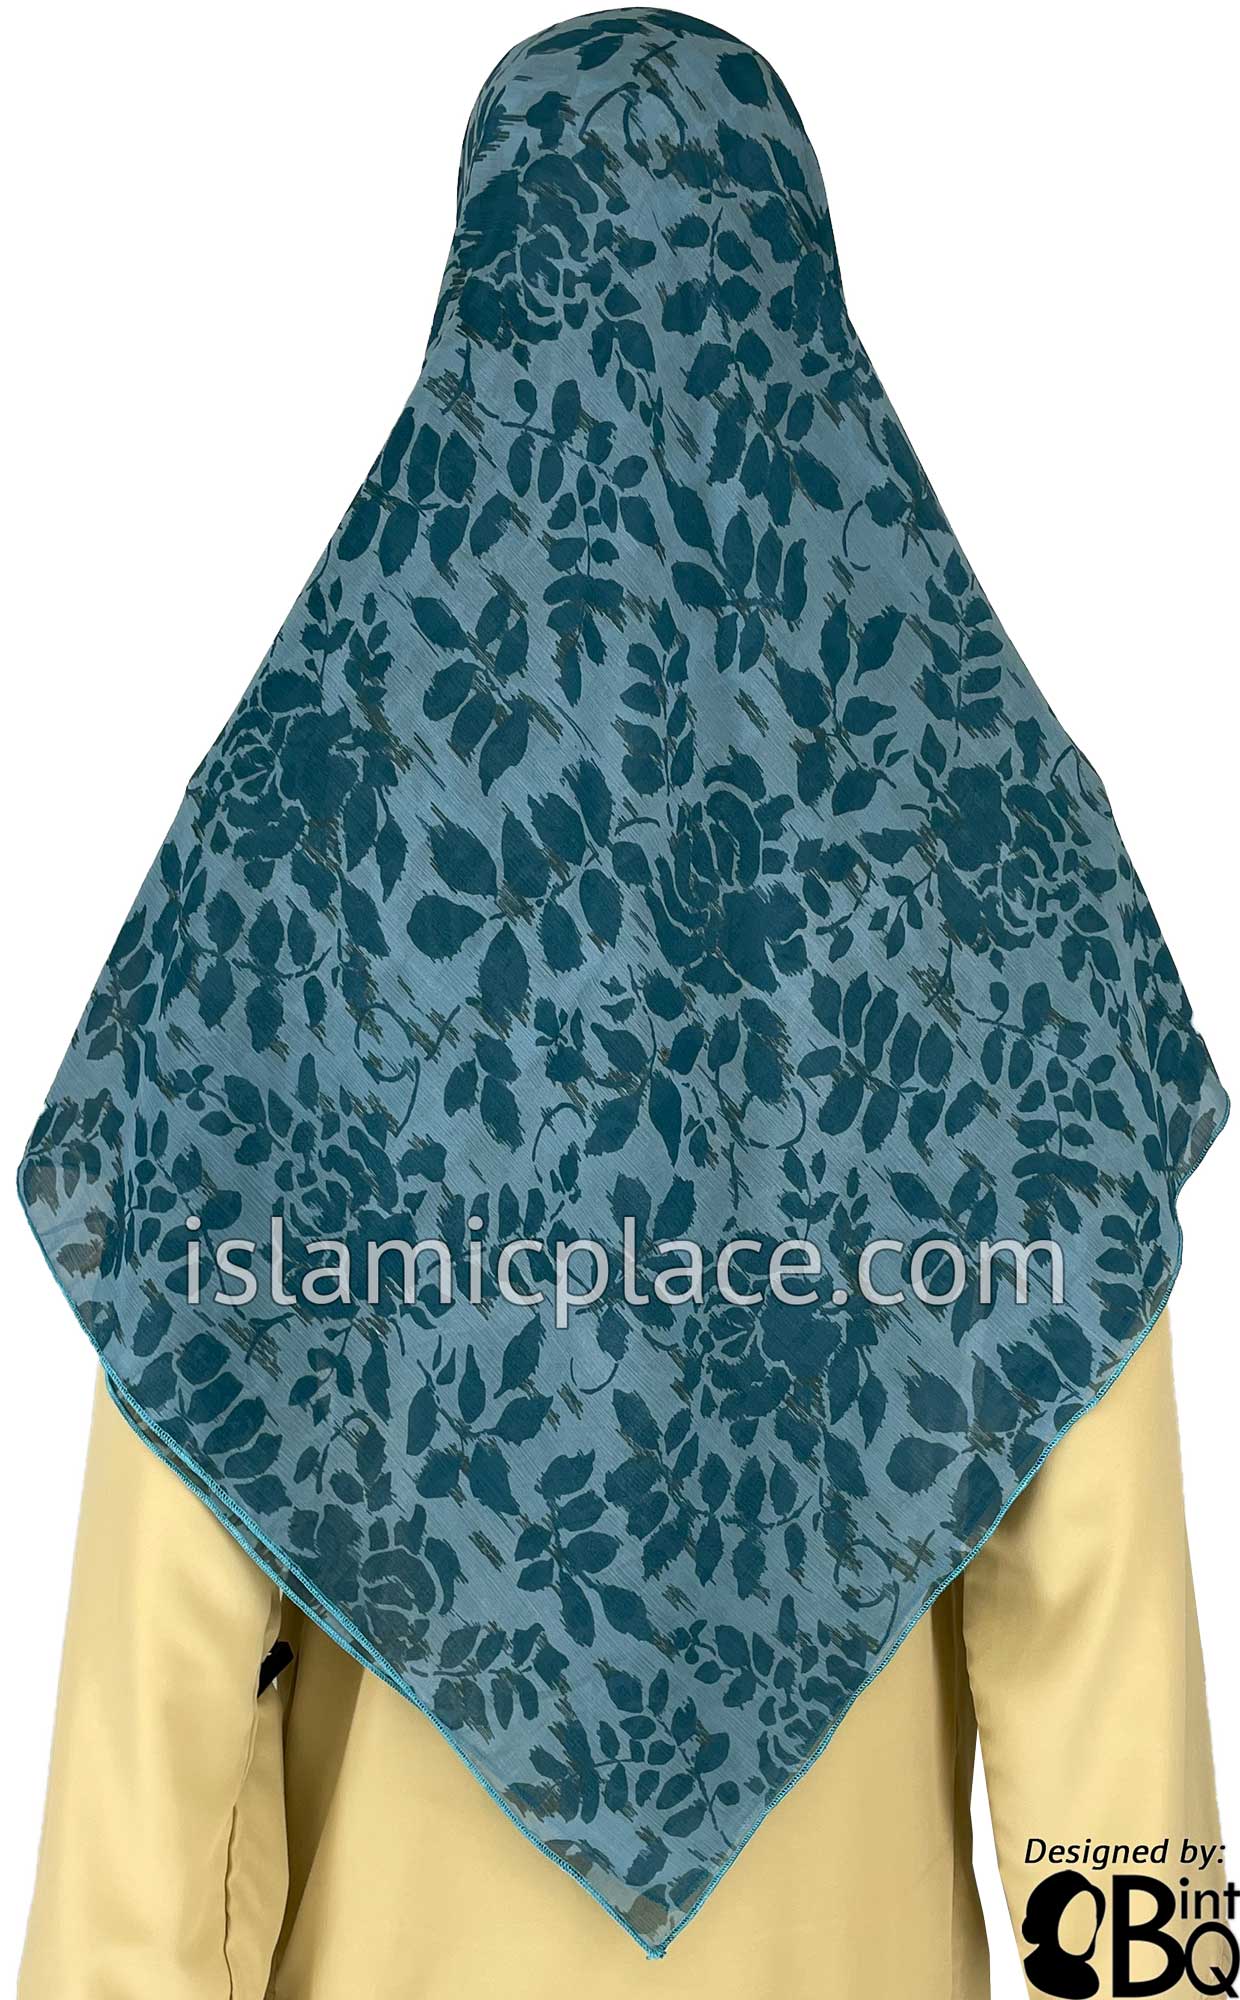 Shades on Blue Branches Design - 45" Square Printed Khimar